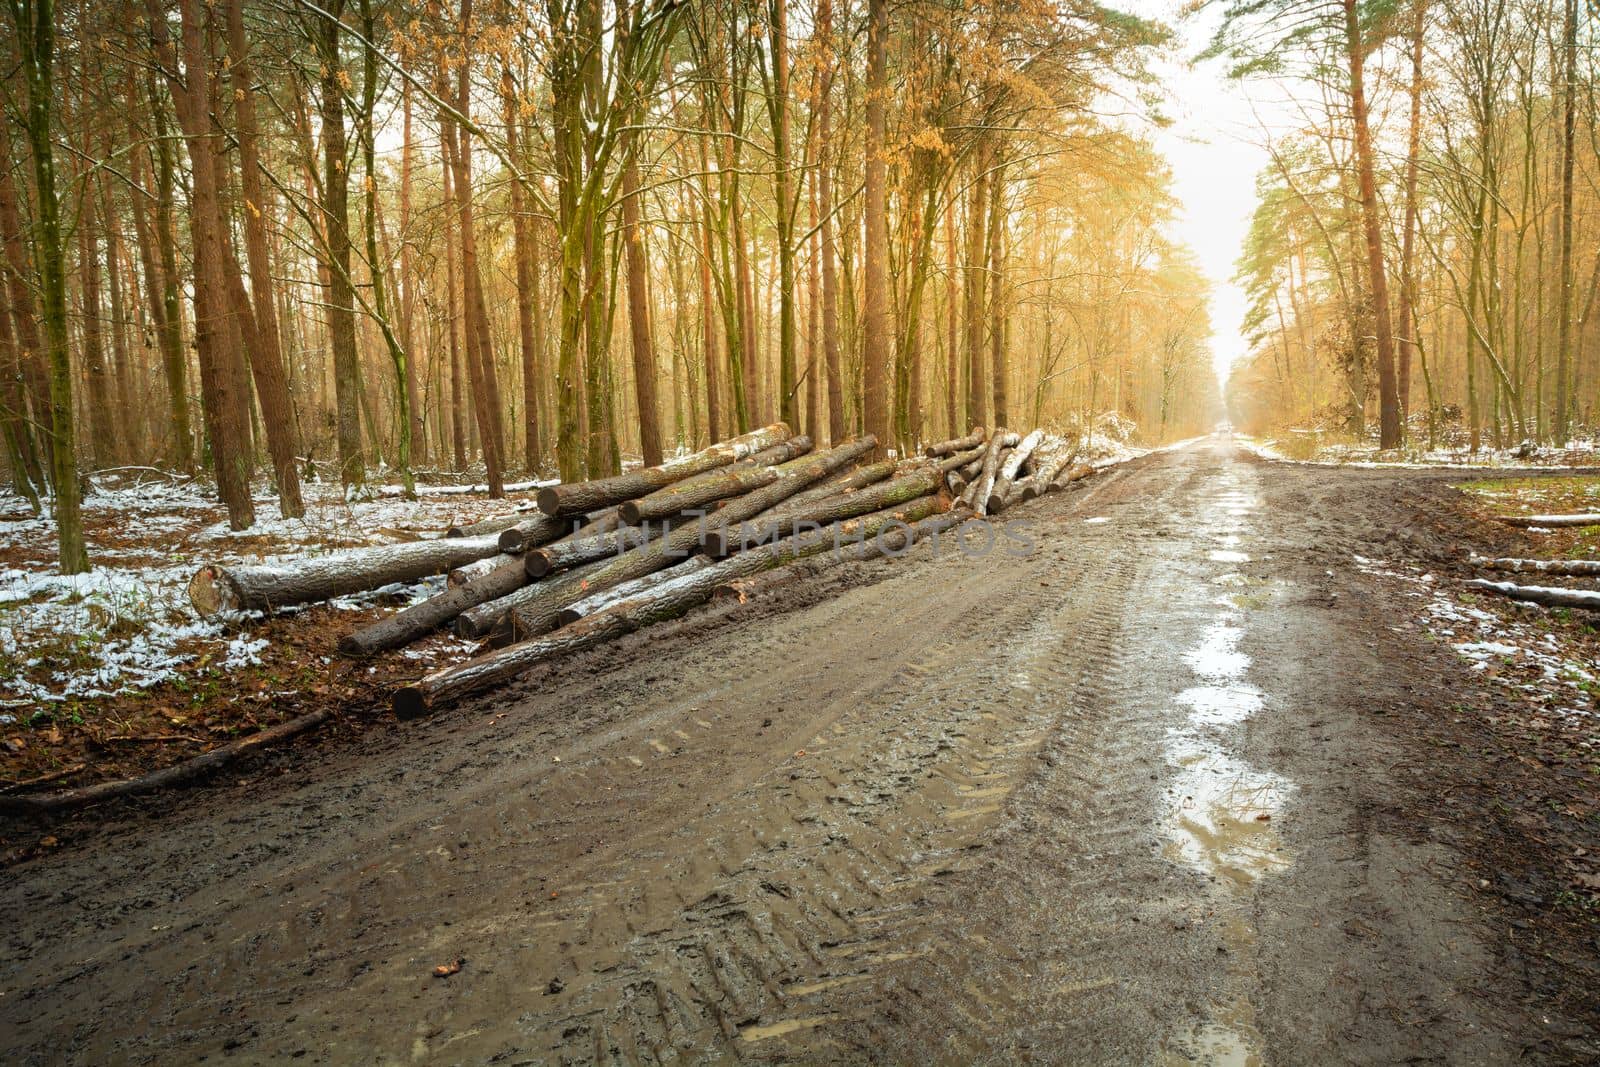 Muddy road in the forest with felled trees, eastern Poland by darekb22